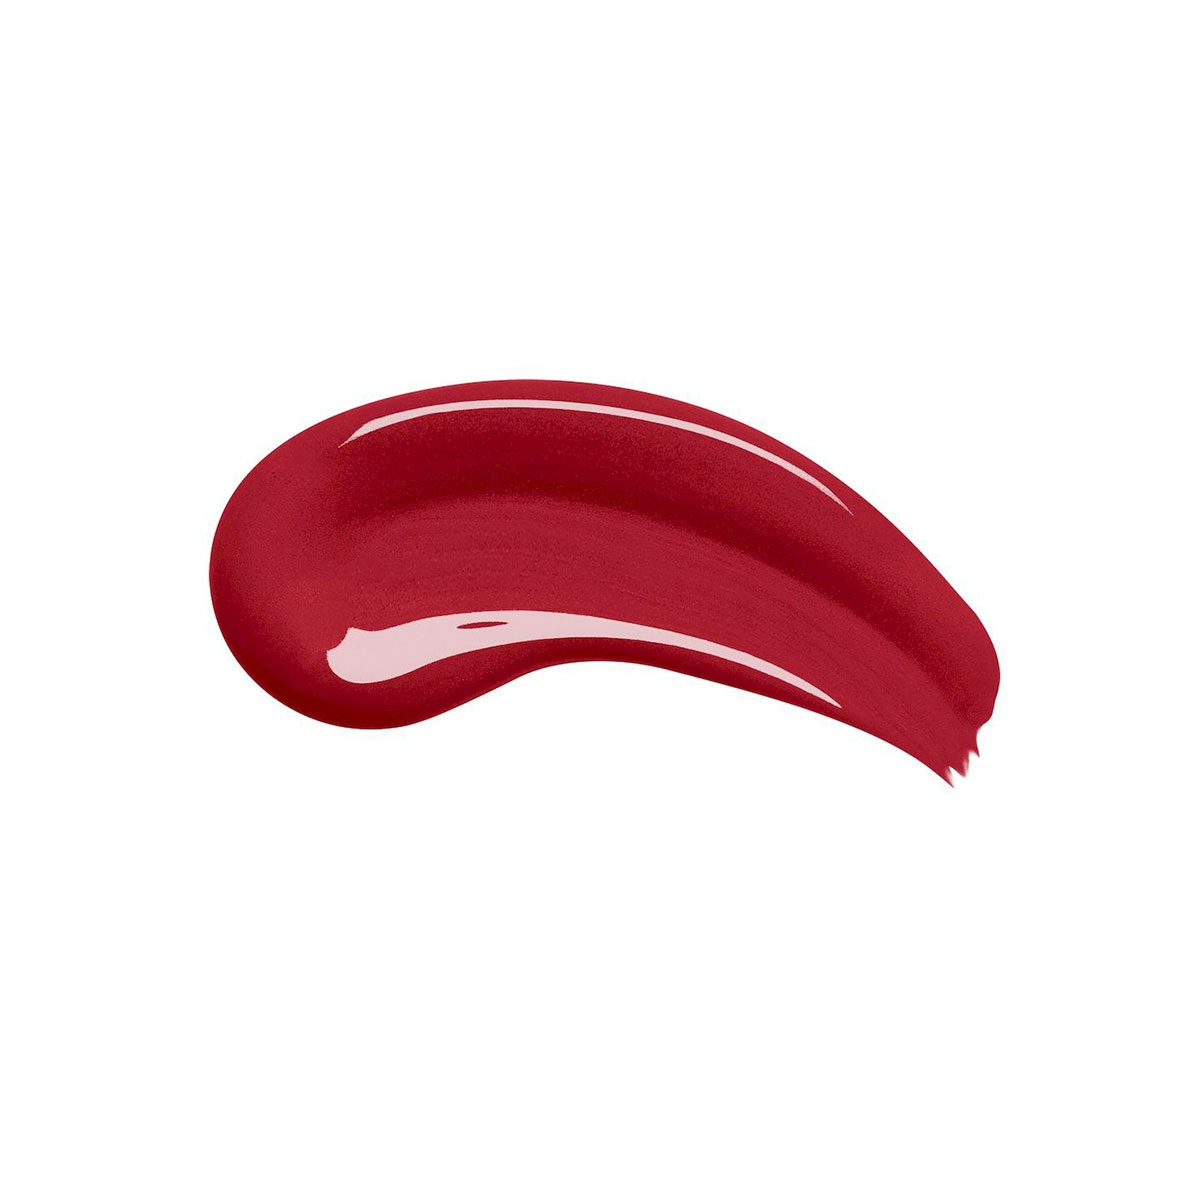 Labial Infaillible 24H Loreal 1 ud